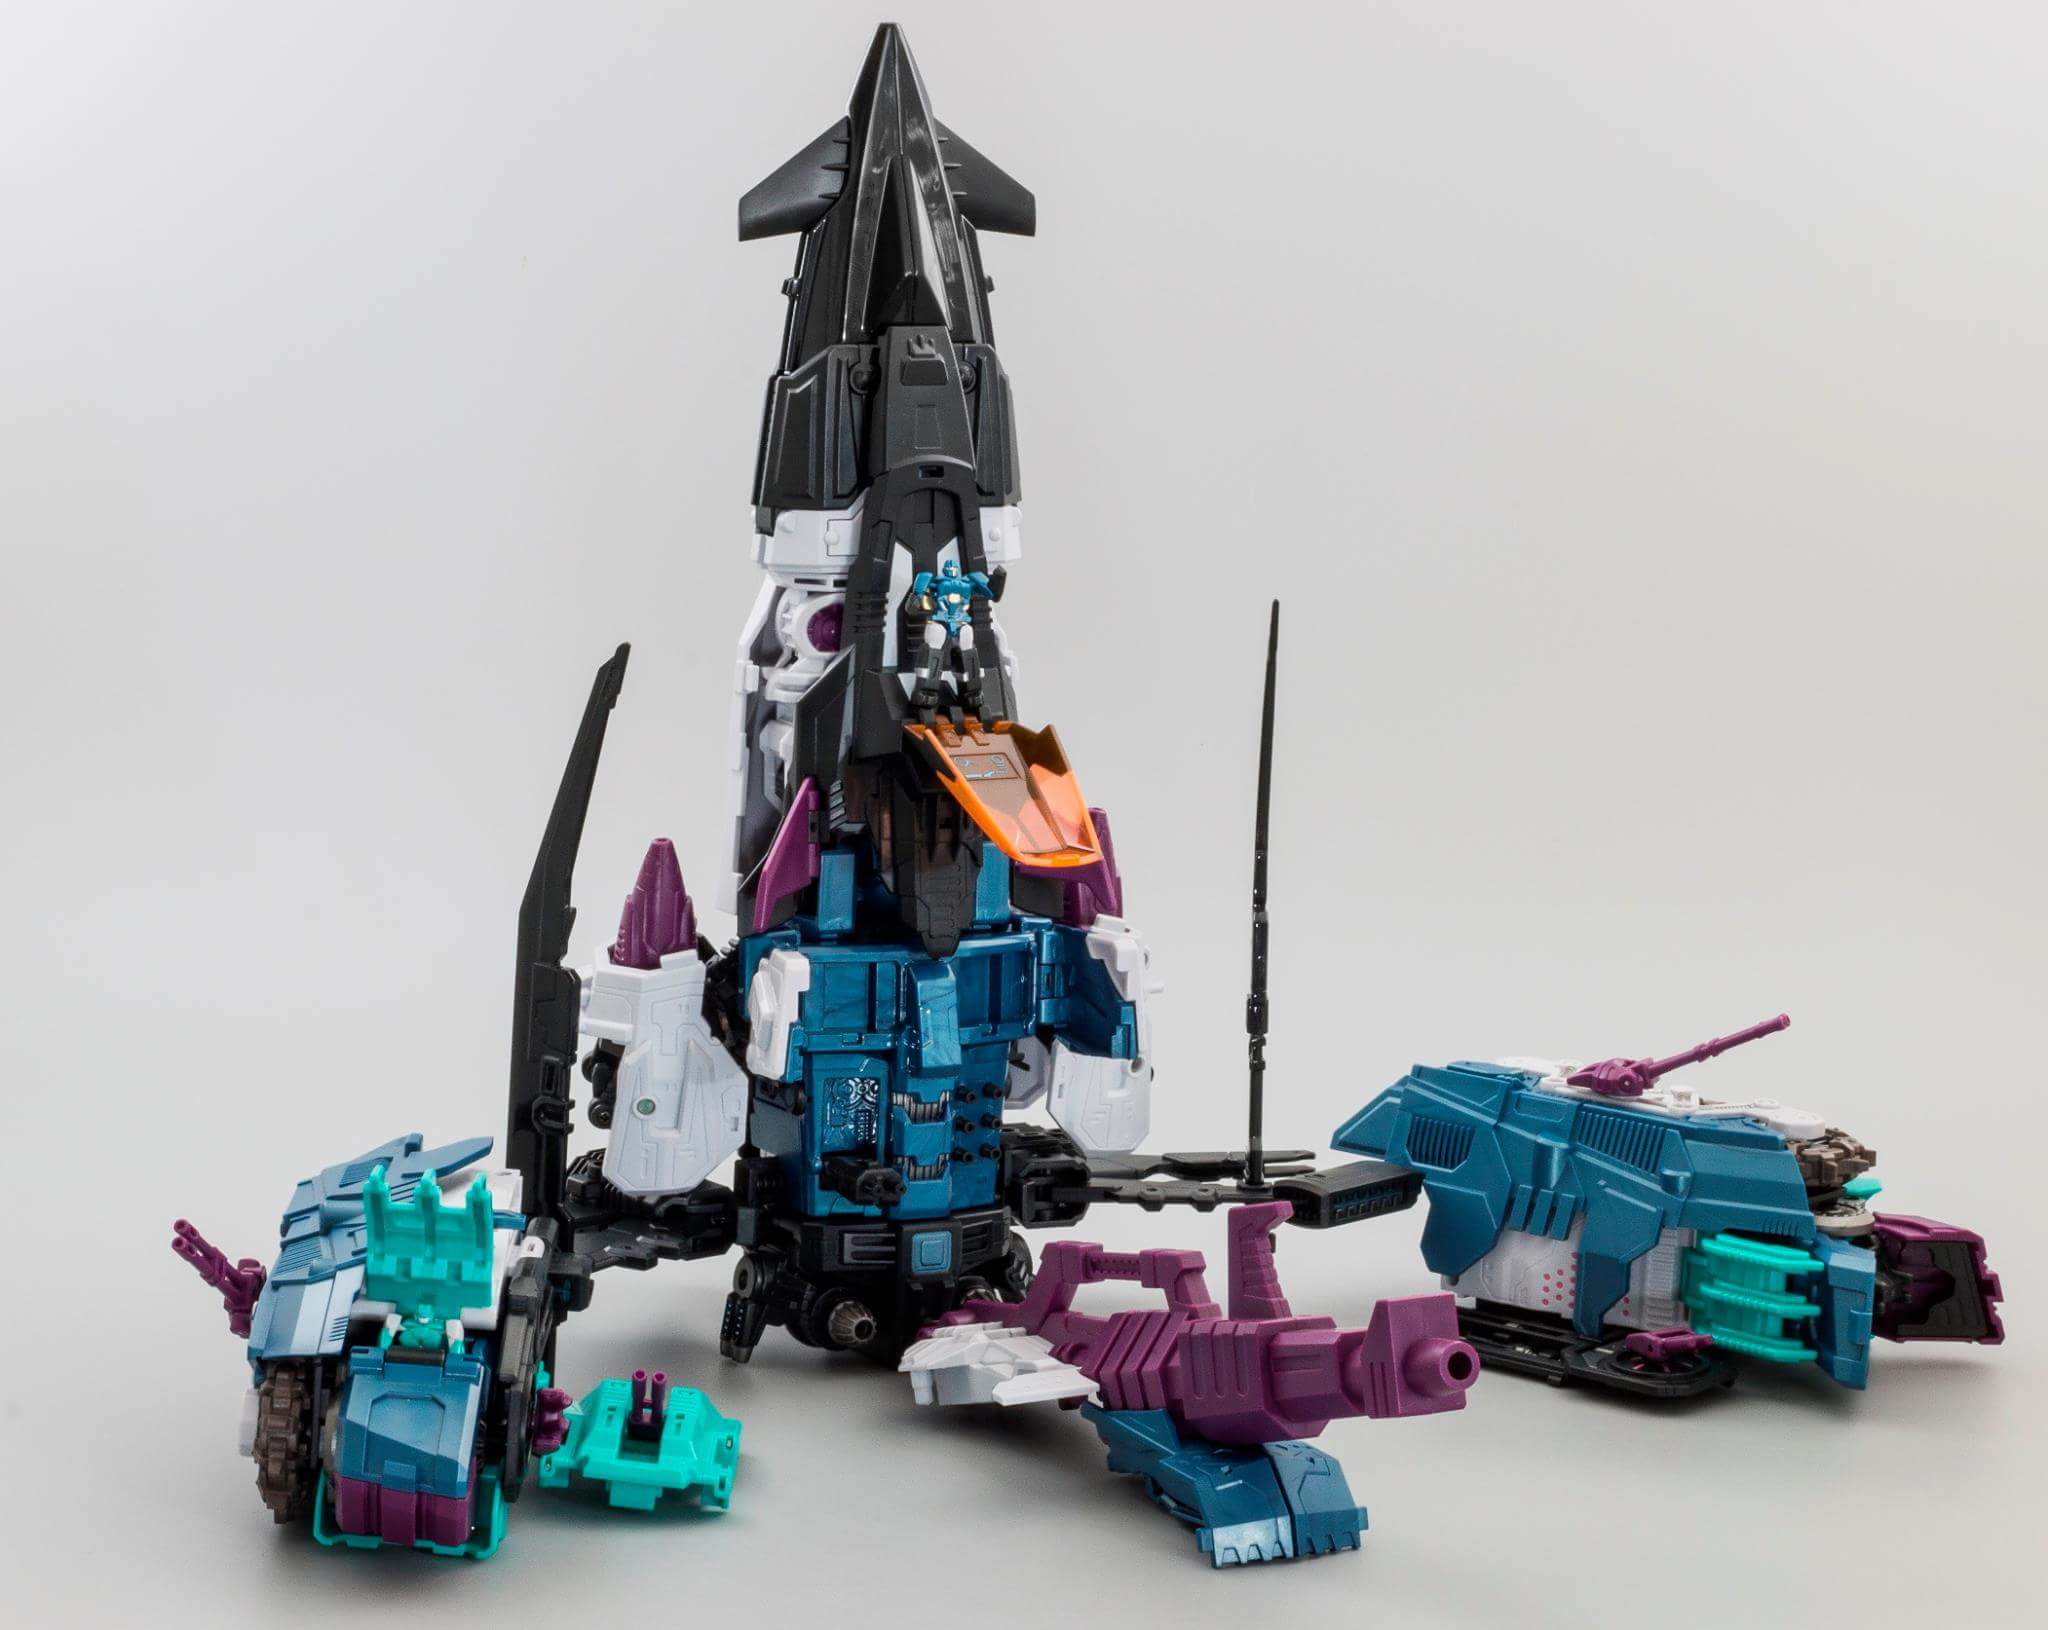 [Mastermind Creations] Produit Tiers - R-17 Carnifex - aka Overlord (TF Masterforce) - Page 3 LTKZcsRS